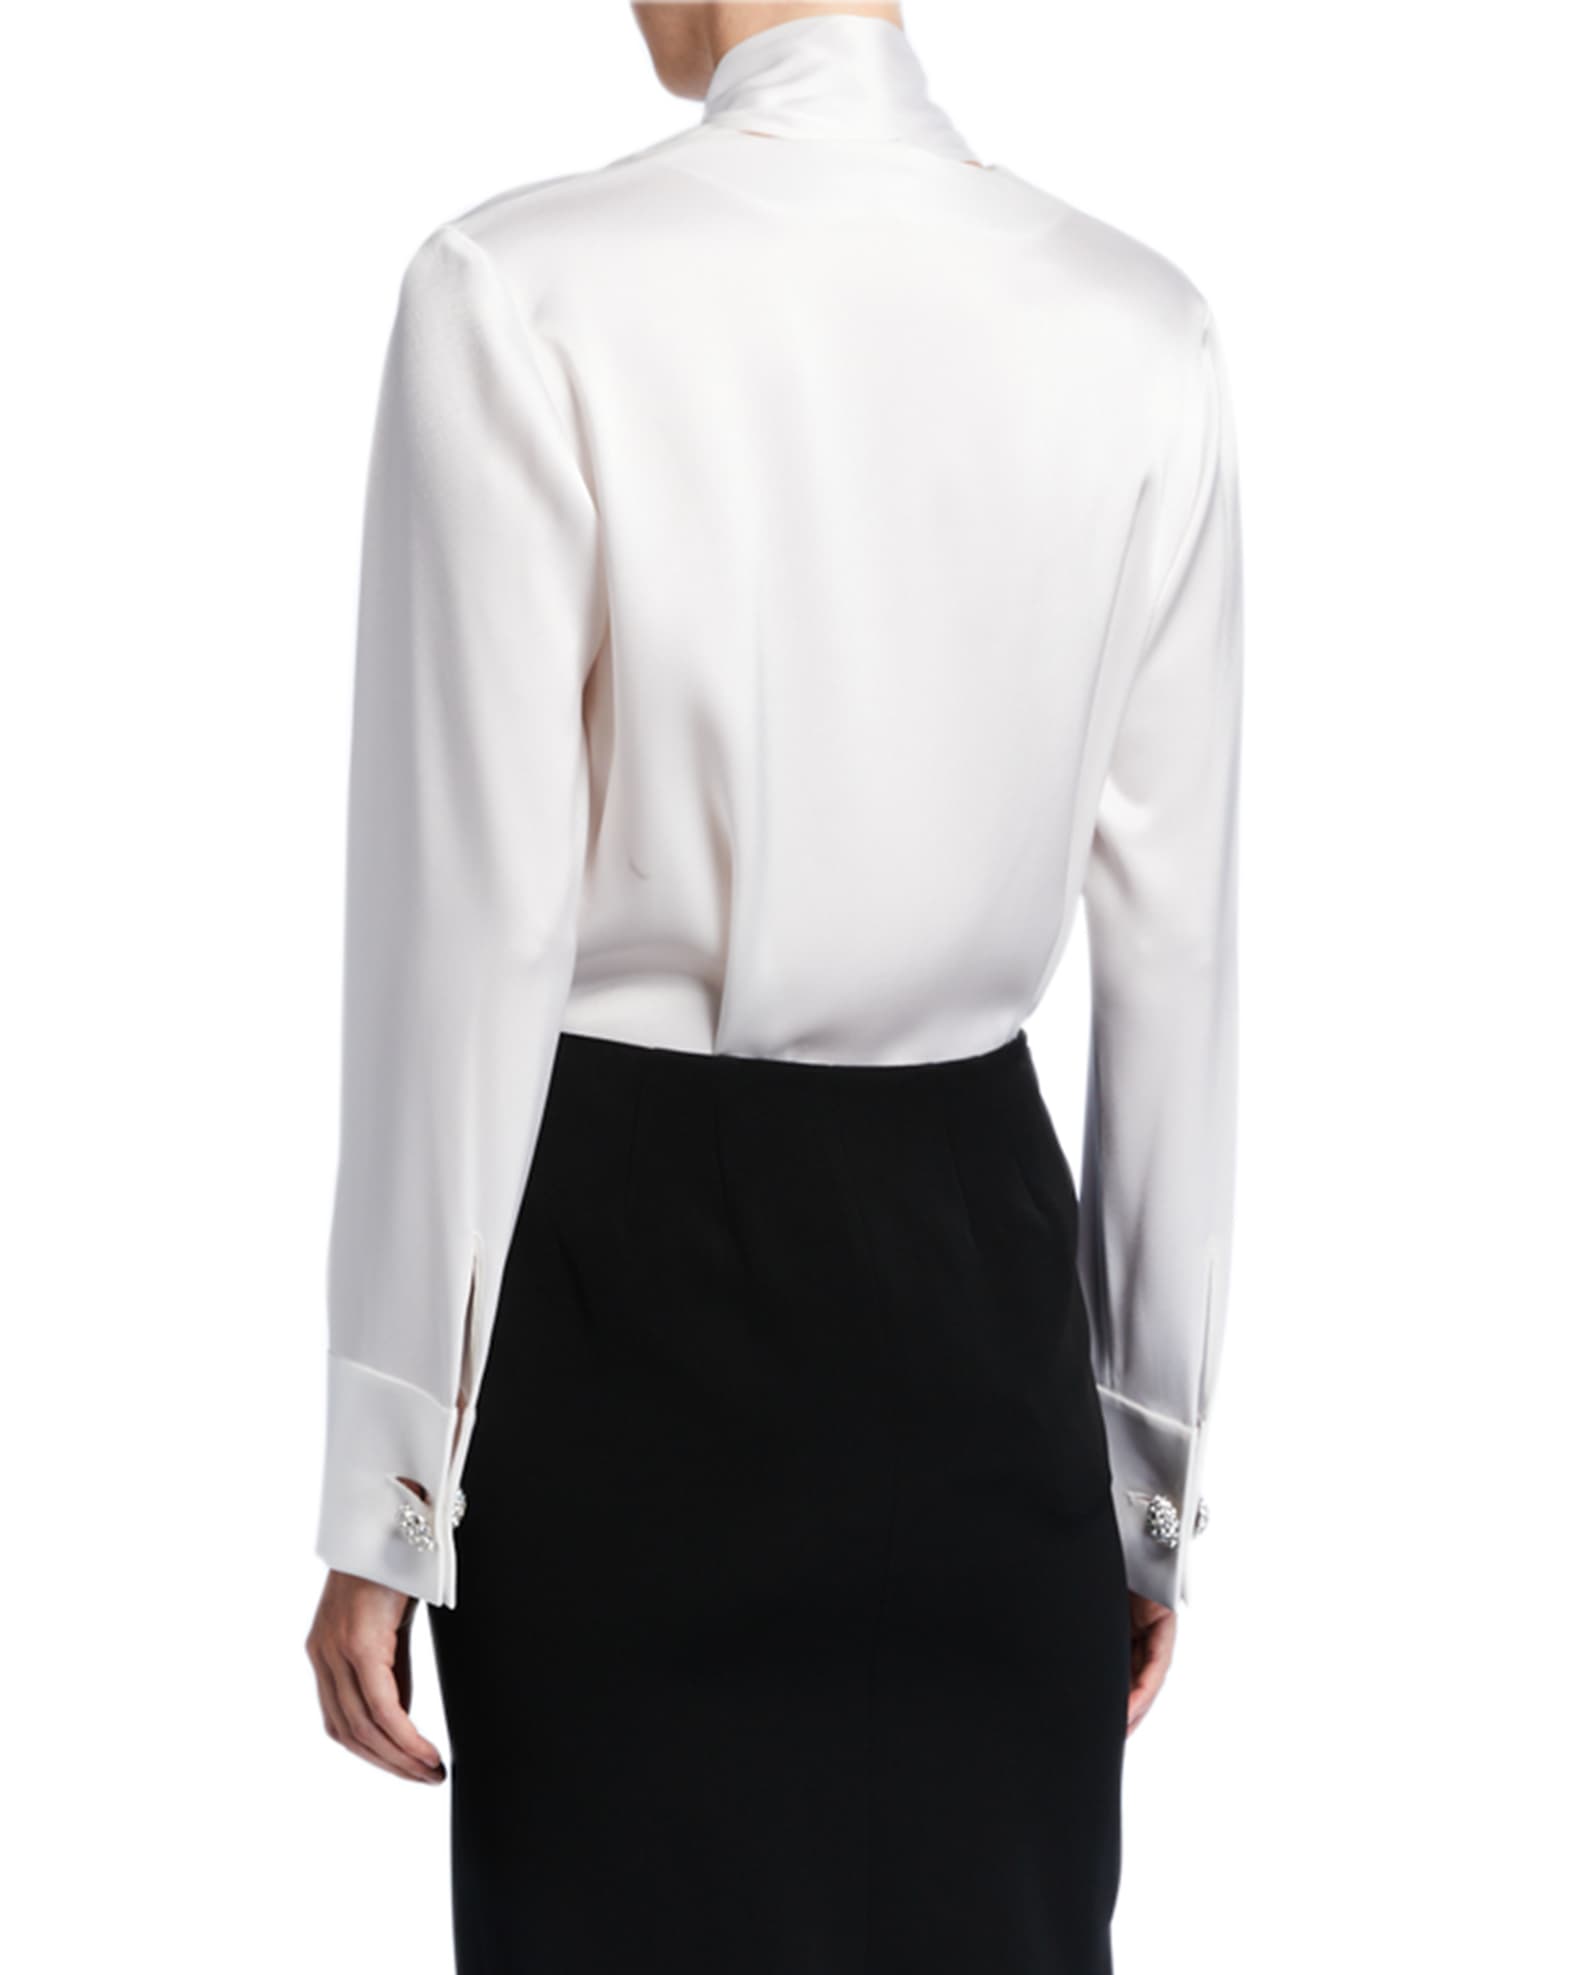 Liquid Satin Tie-Neck Blouse and Matching Items | Neiman Marcus